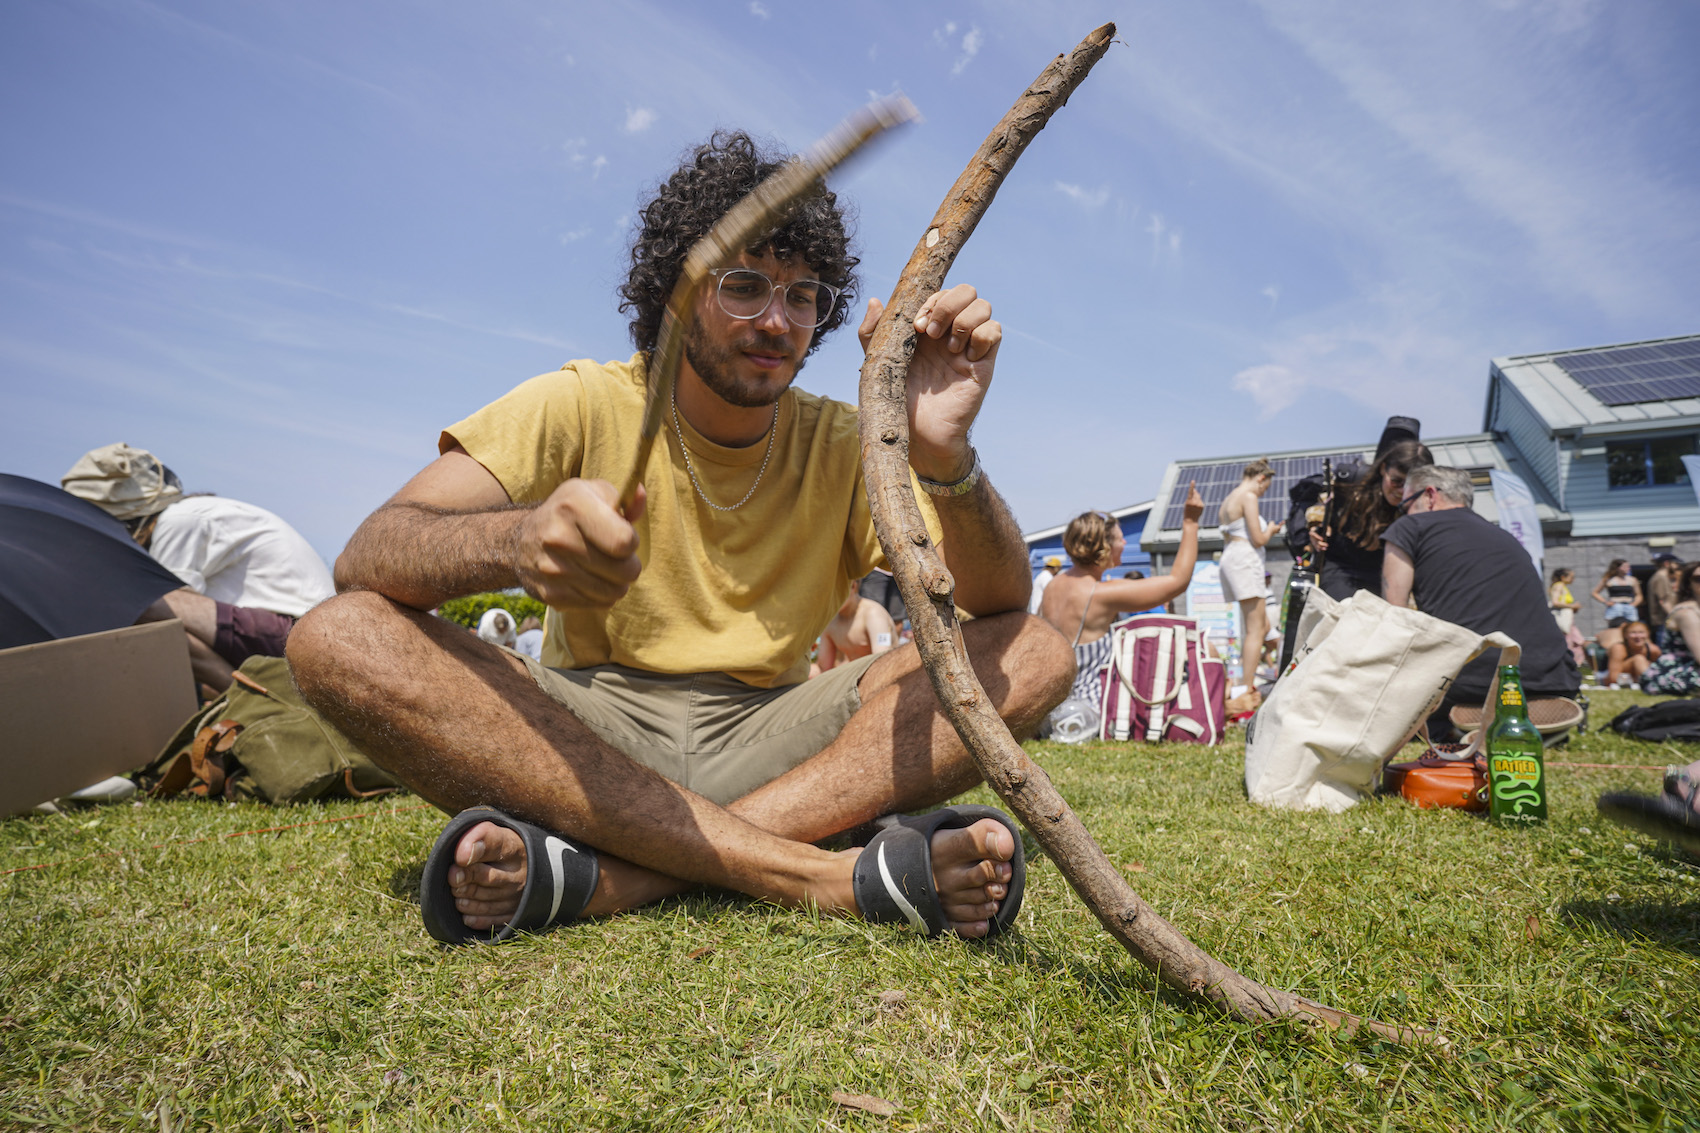 A solo competitor using wood stick trying to attract the worms out